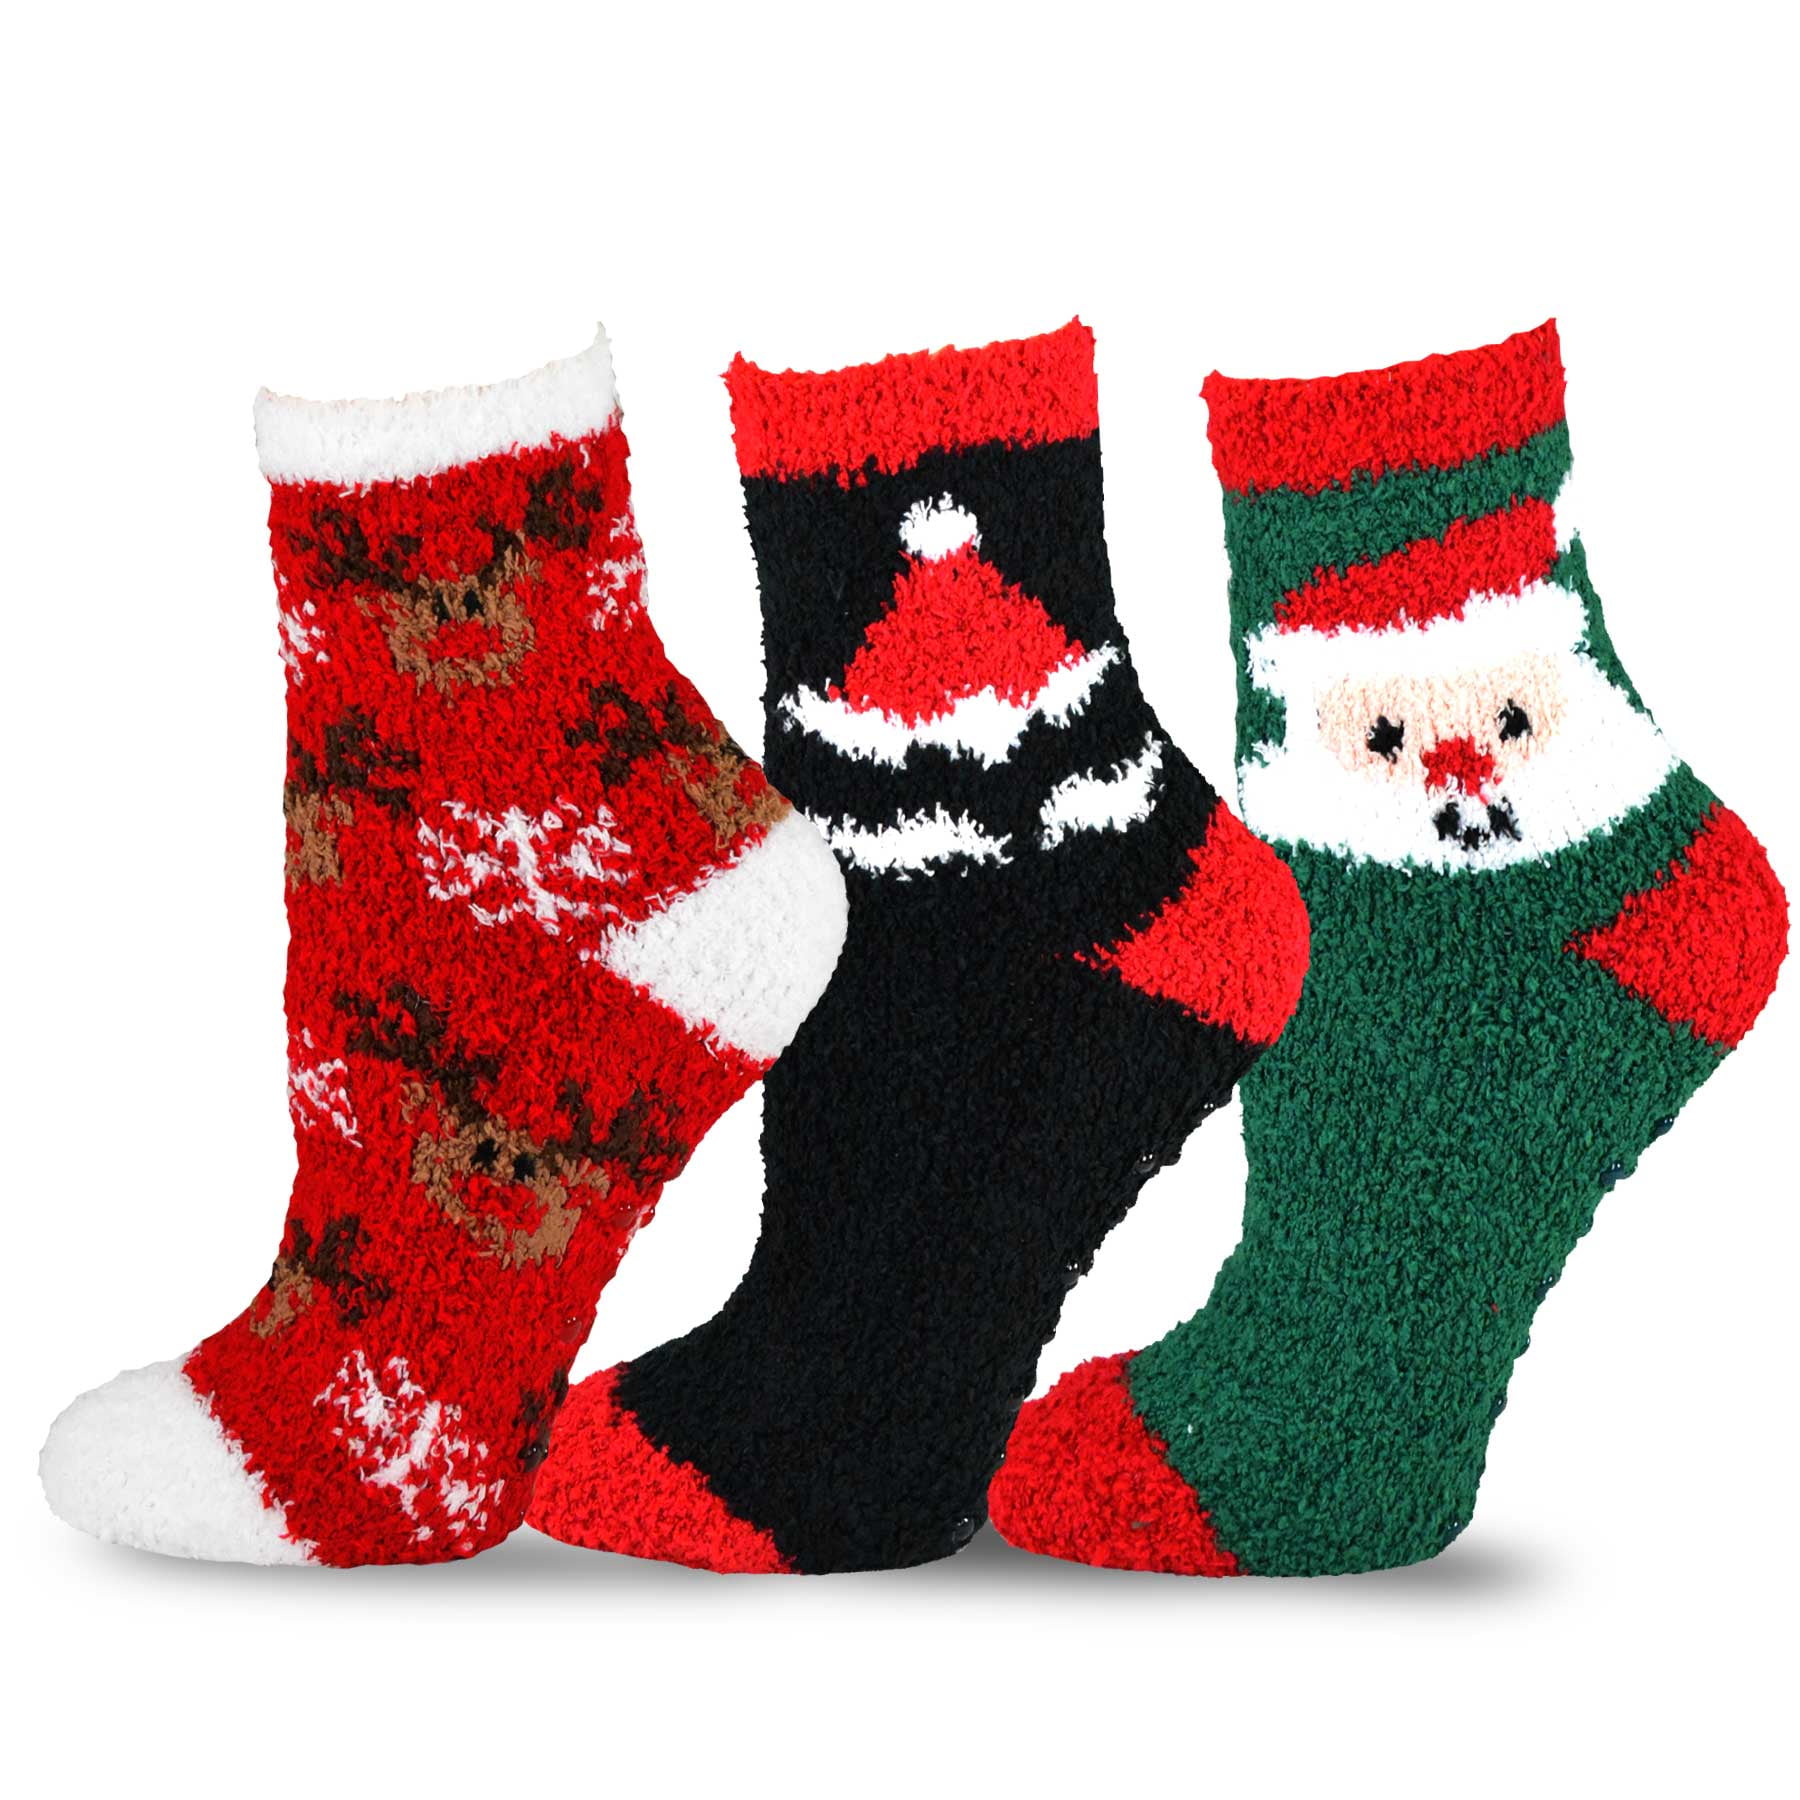 Christmas Reindeer socks kids toddler 90% soft Cotton Age 1 to 12 years 3 pairs 